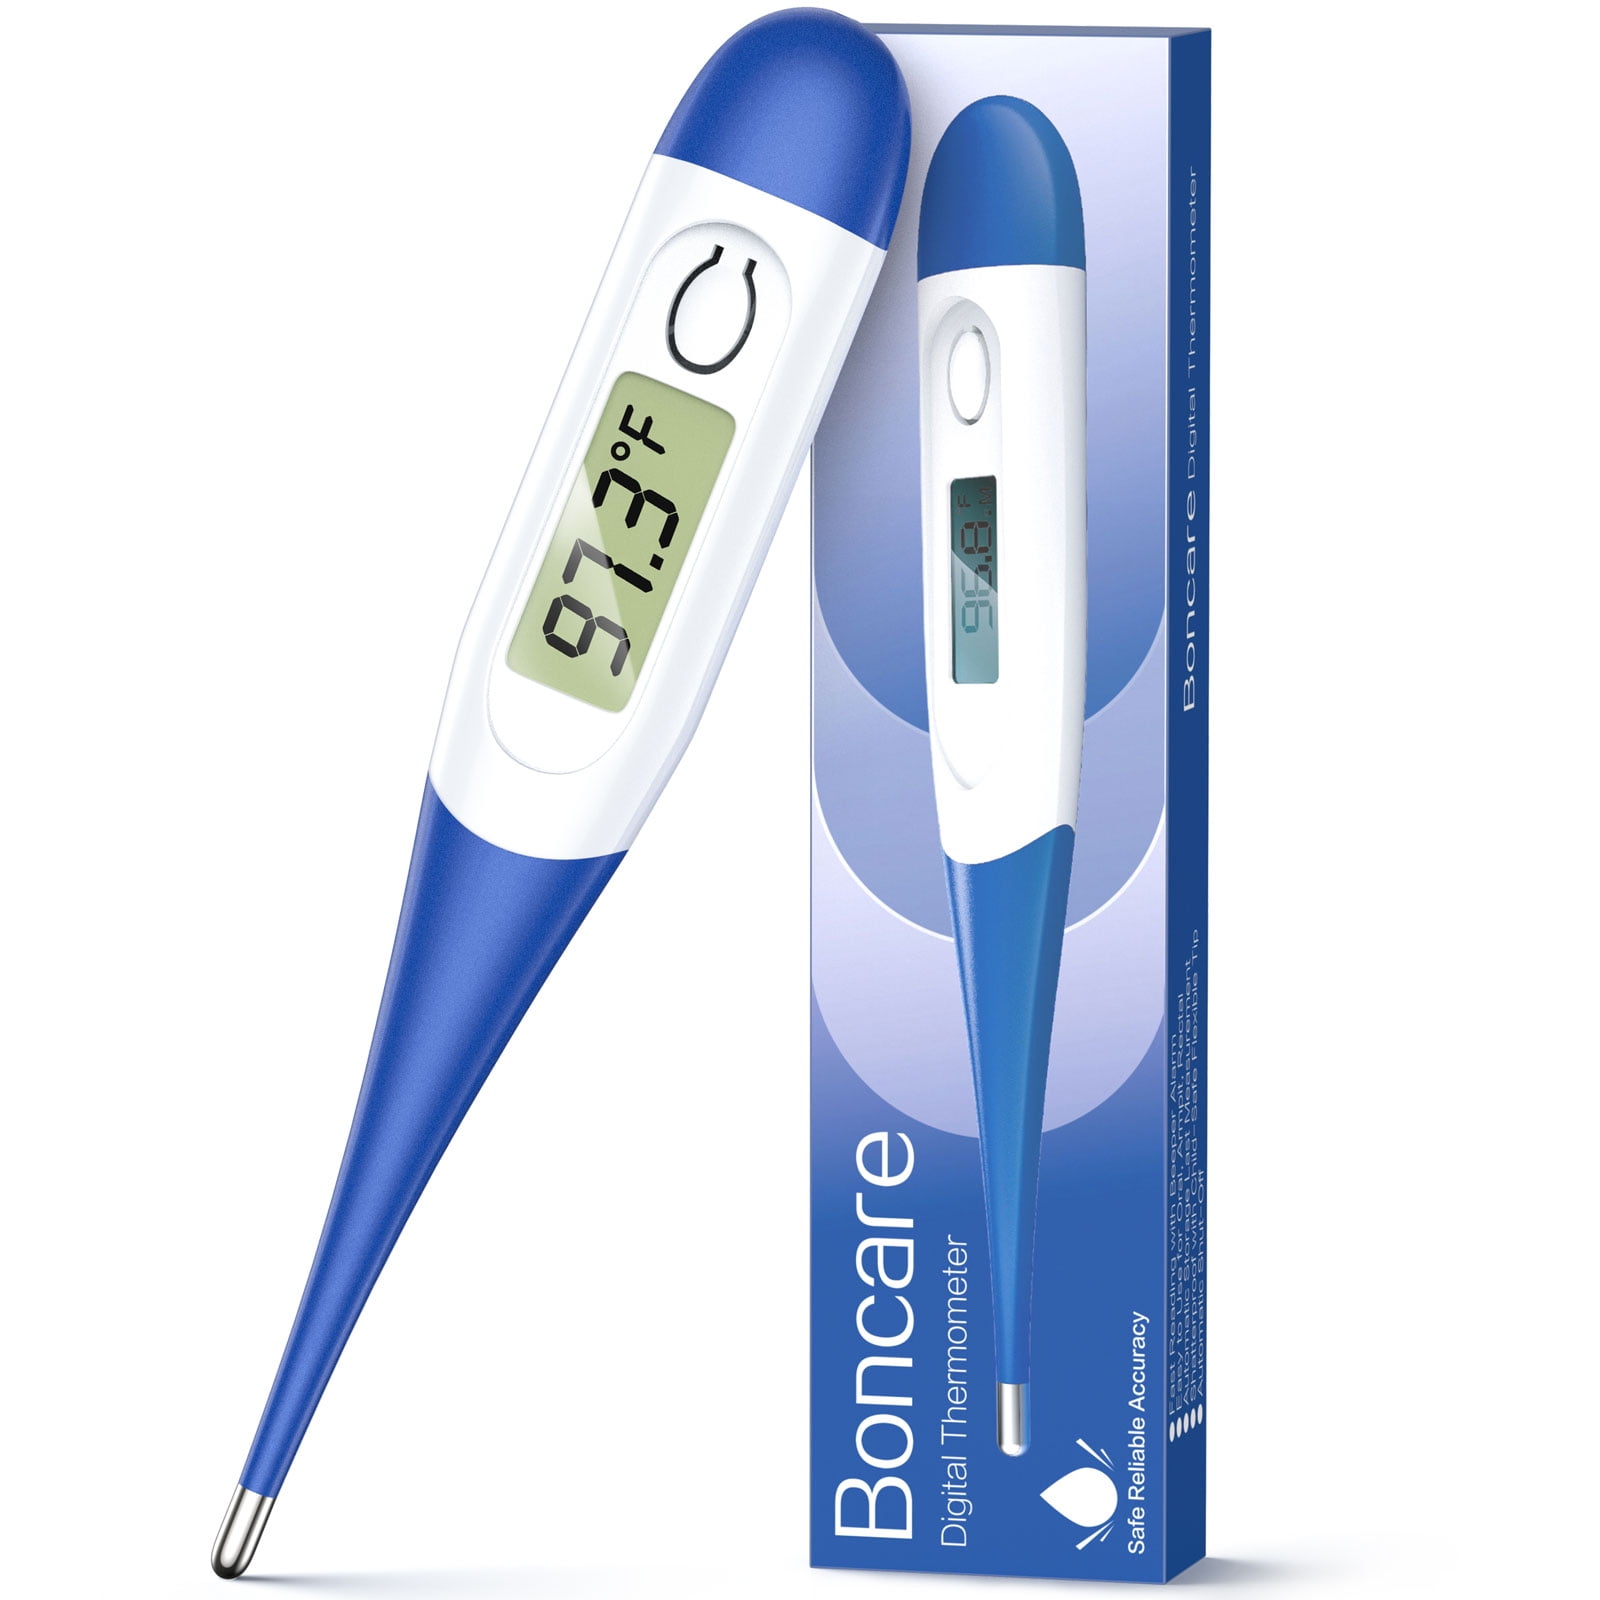 Digital Body Thermometer for Baby Child Adult for Rectal Oral Underarm Temperature with Indication LCD Display 1 Pack Detect Fever Quickly Digital Thermometer 